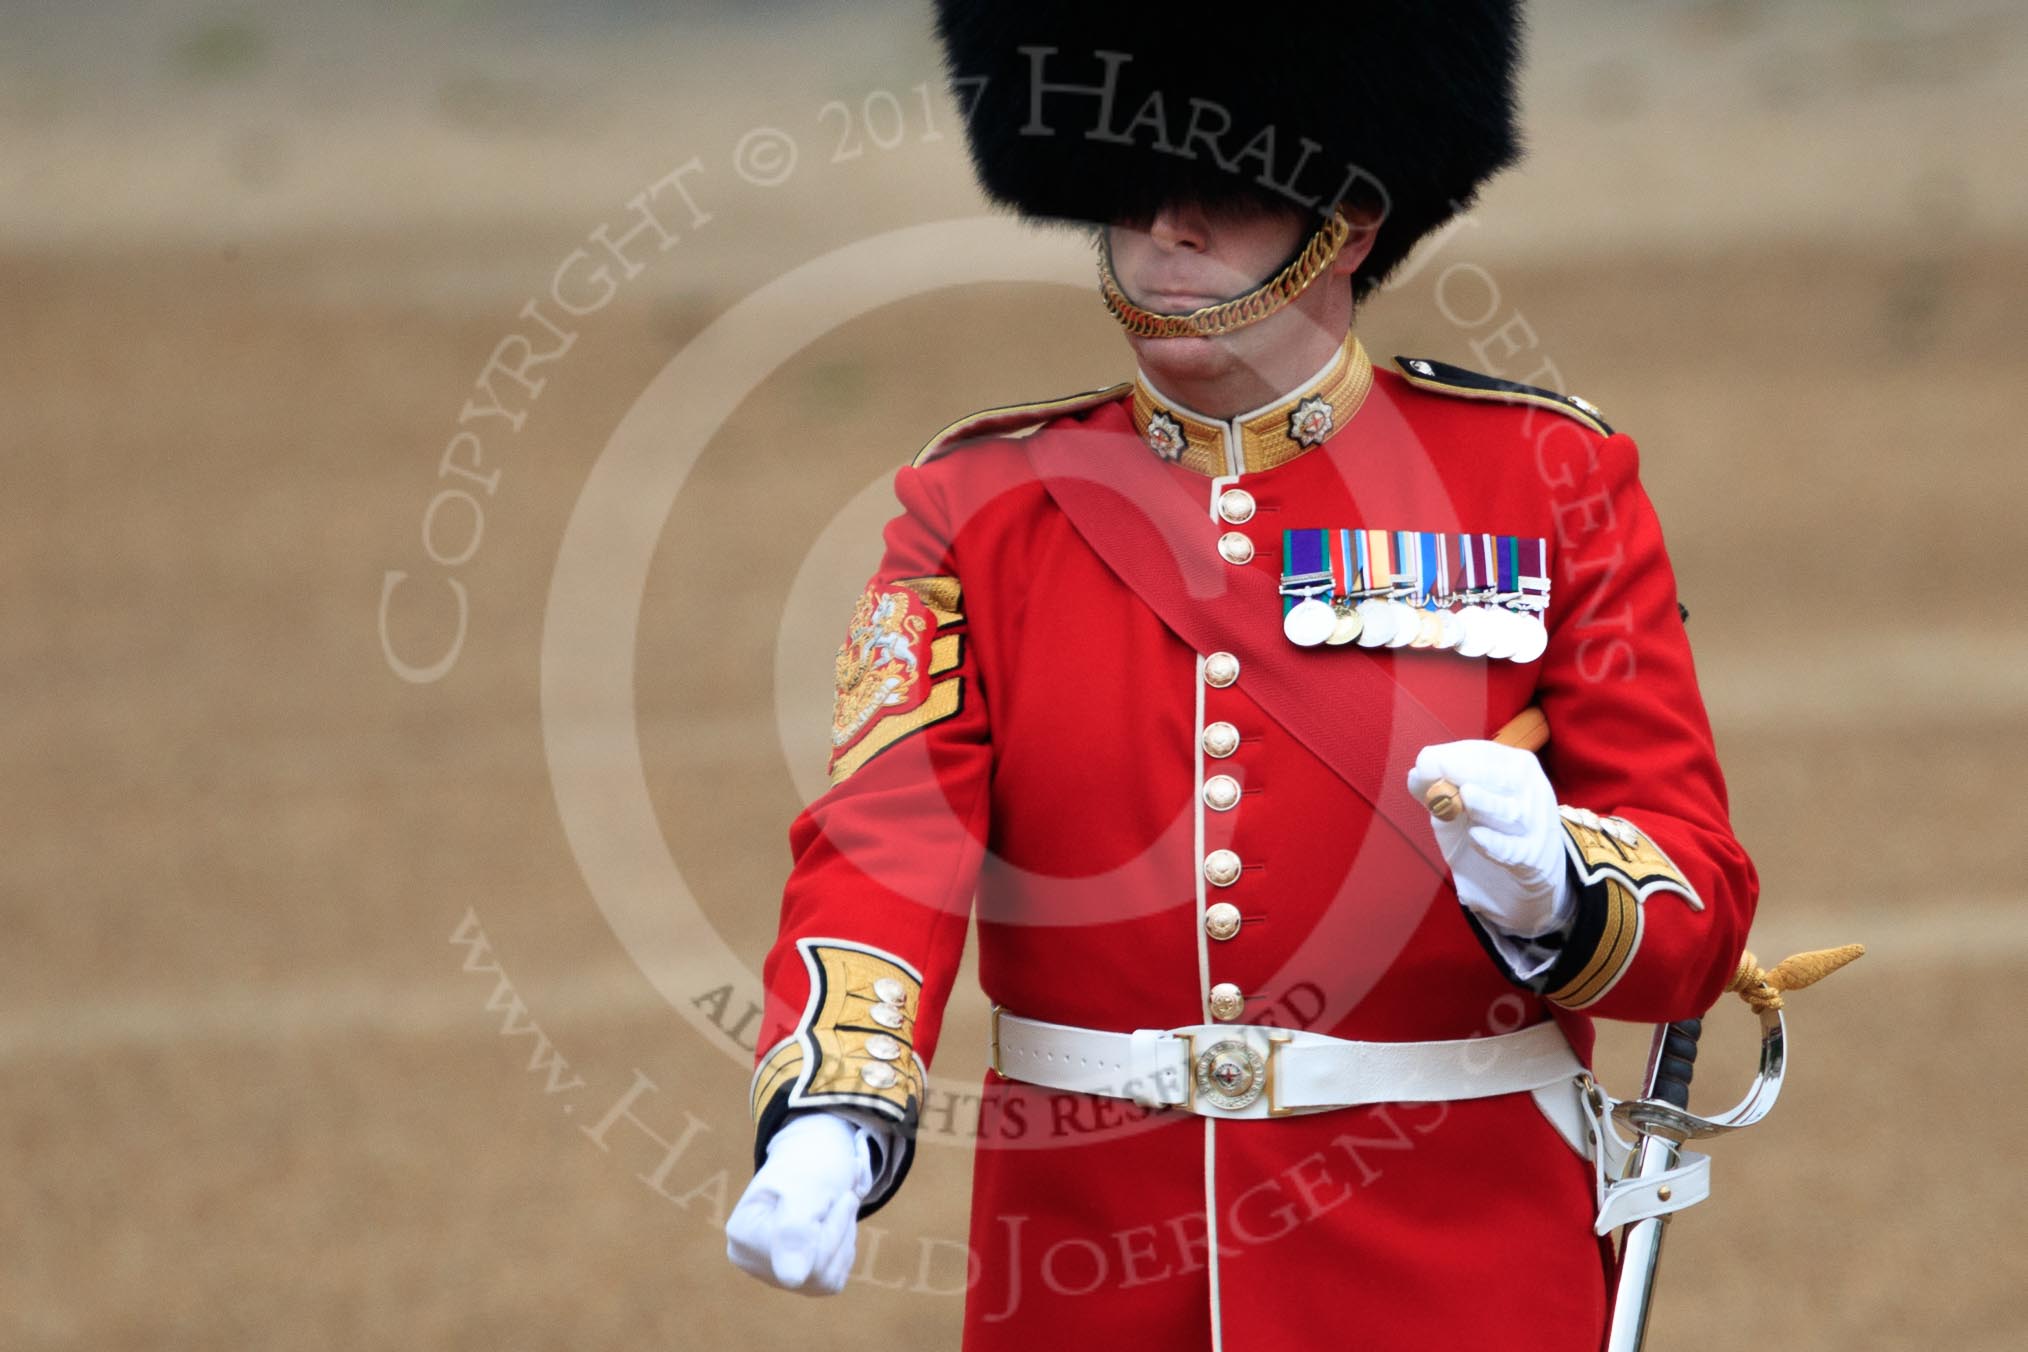 during The Colonel's Review {iptcyear4} (final rehearsal for Trooping the Colour, The Queen's Birthday Parade)  at Horse Guards Parade, Westminster, London, 2 June 2018, 10:20.